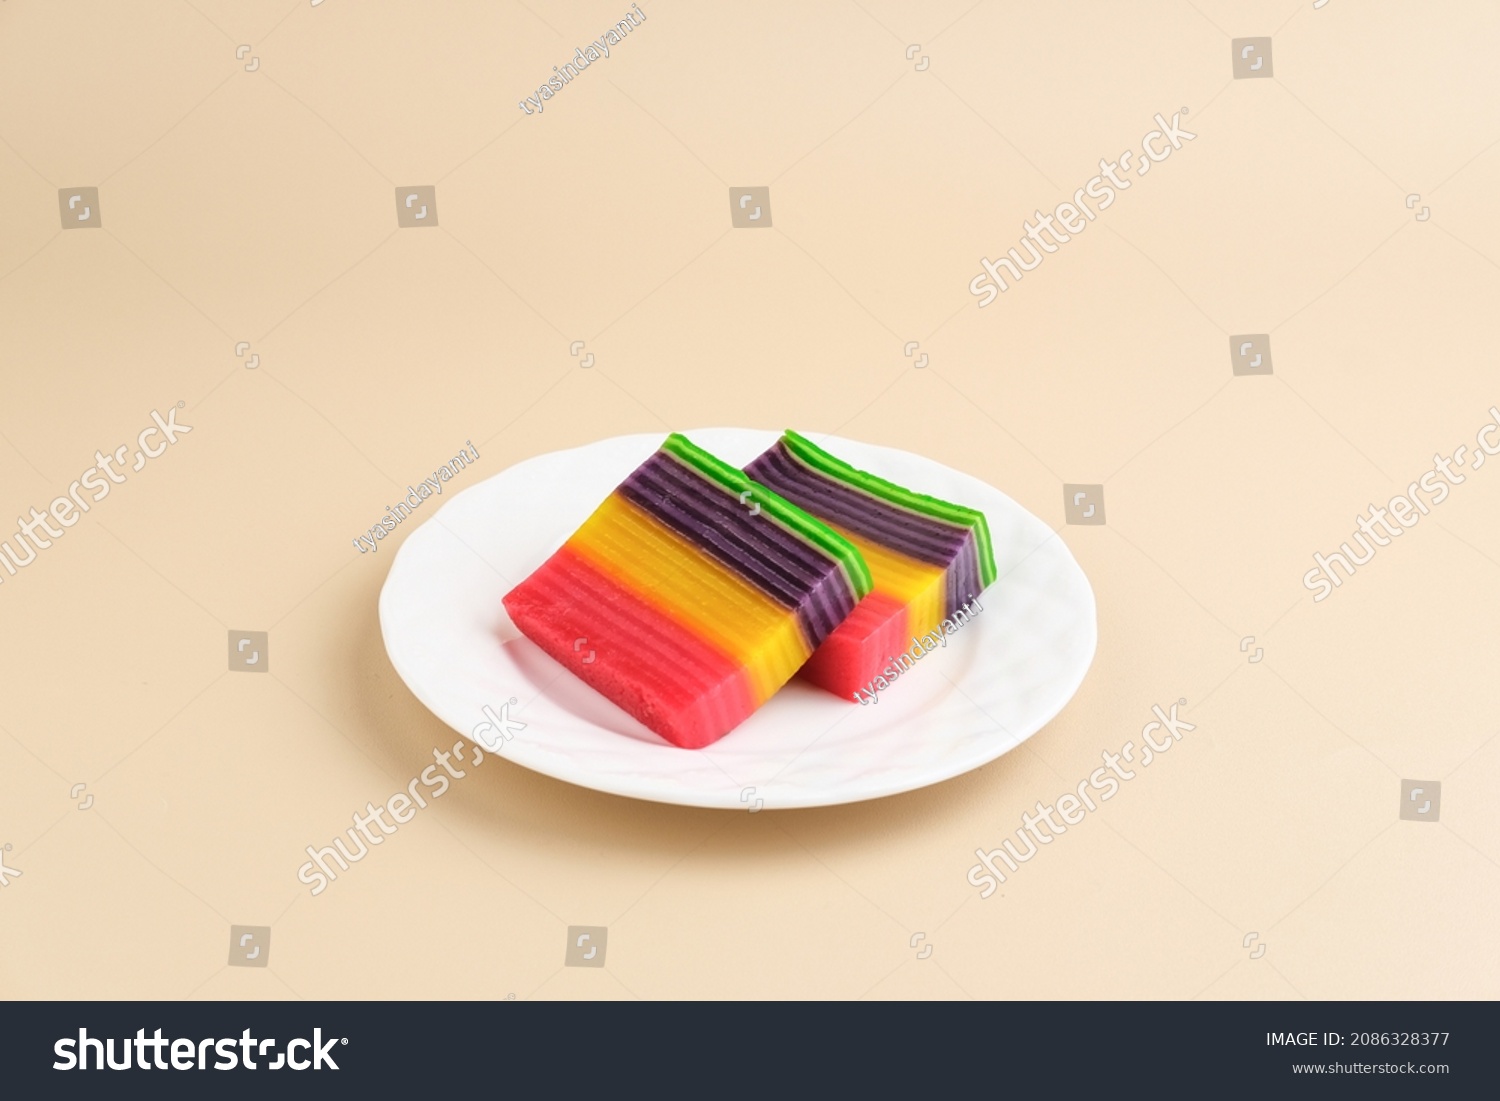 Kue Lapis or Kue Pepe or Rainbow sticky layer cake, Indonesian traditional dessert made from rice flour and coconut milk, steamed layer by layer. Selective focus. #2086328377